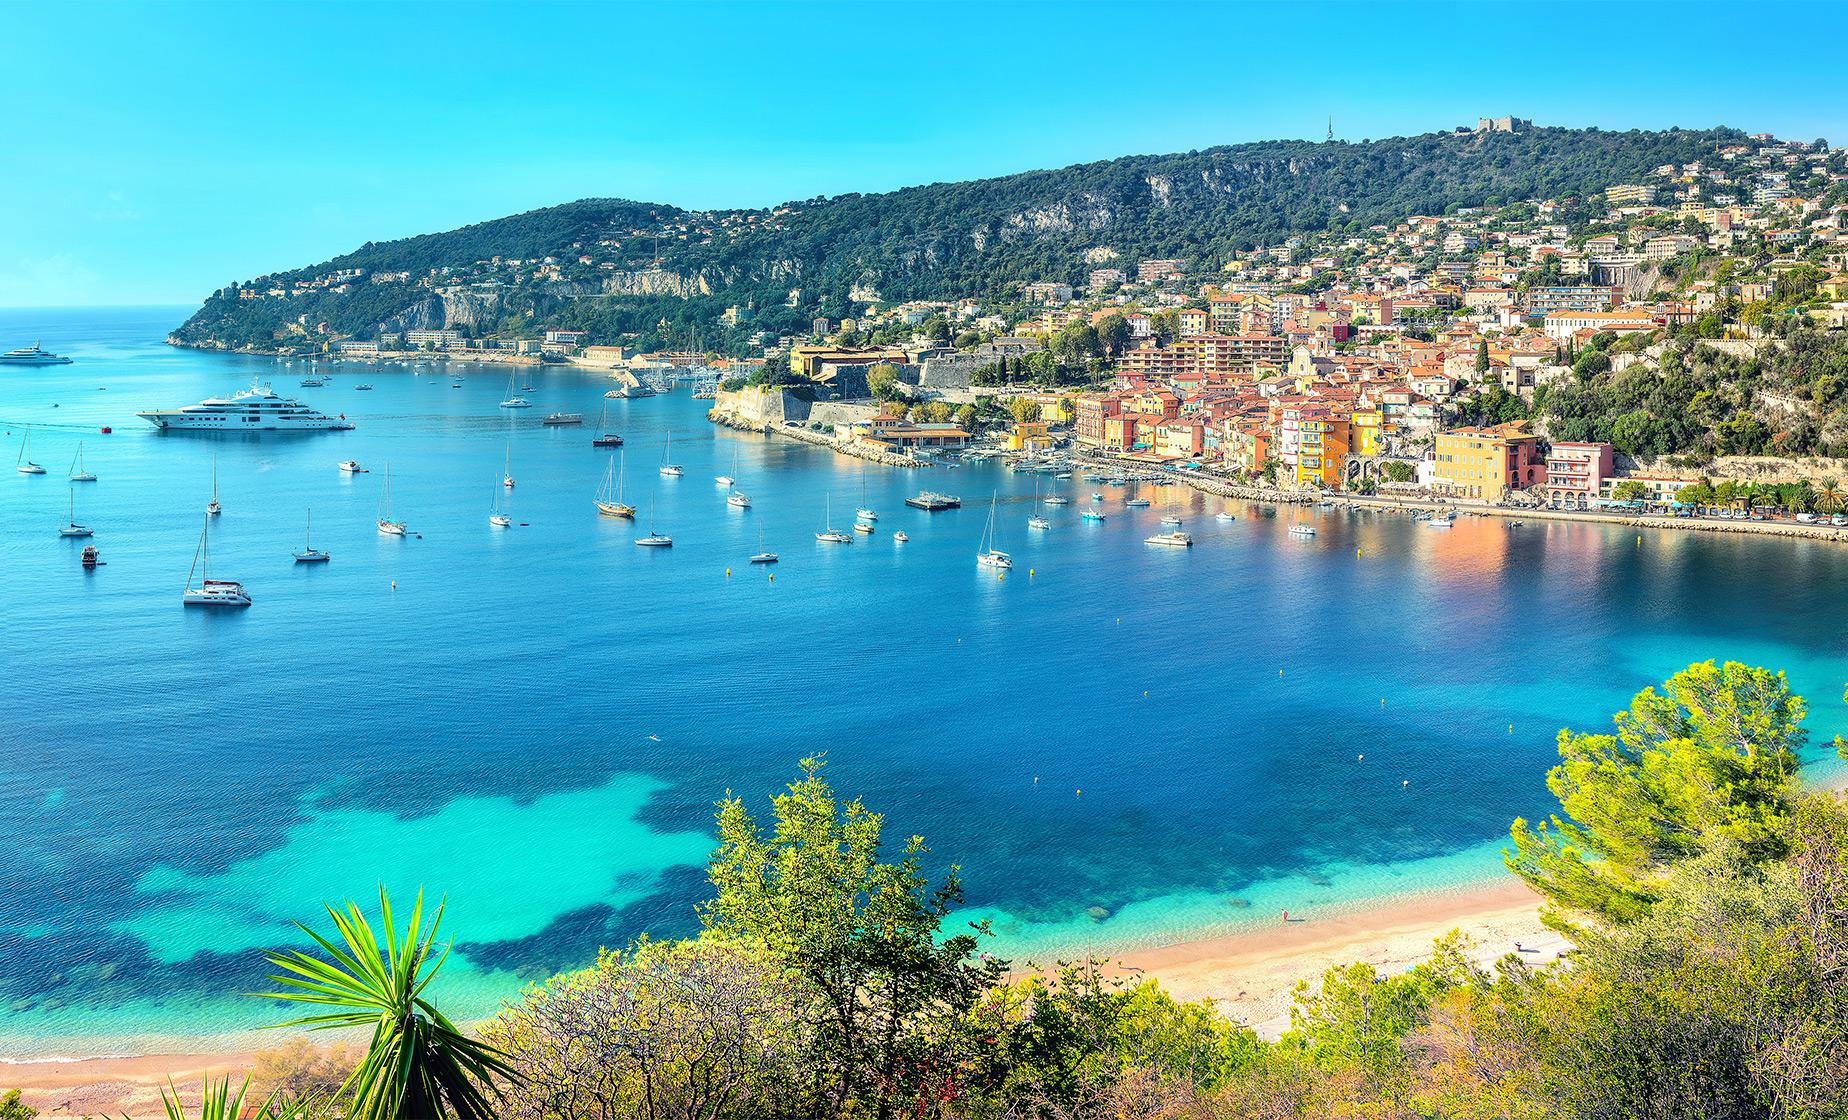 French Riviera Tour from Villefranche (Antibes, Croisette Boulevard)